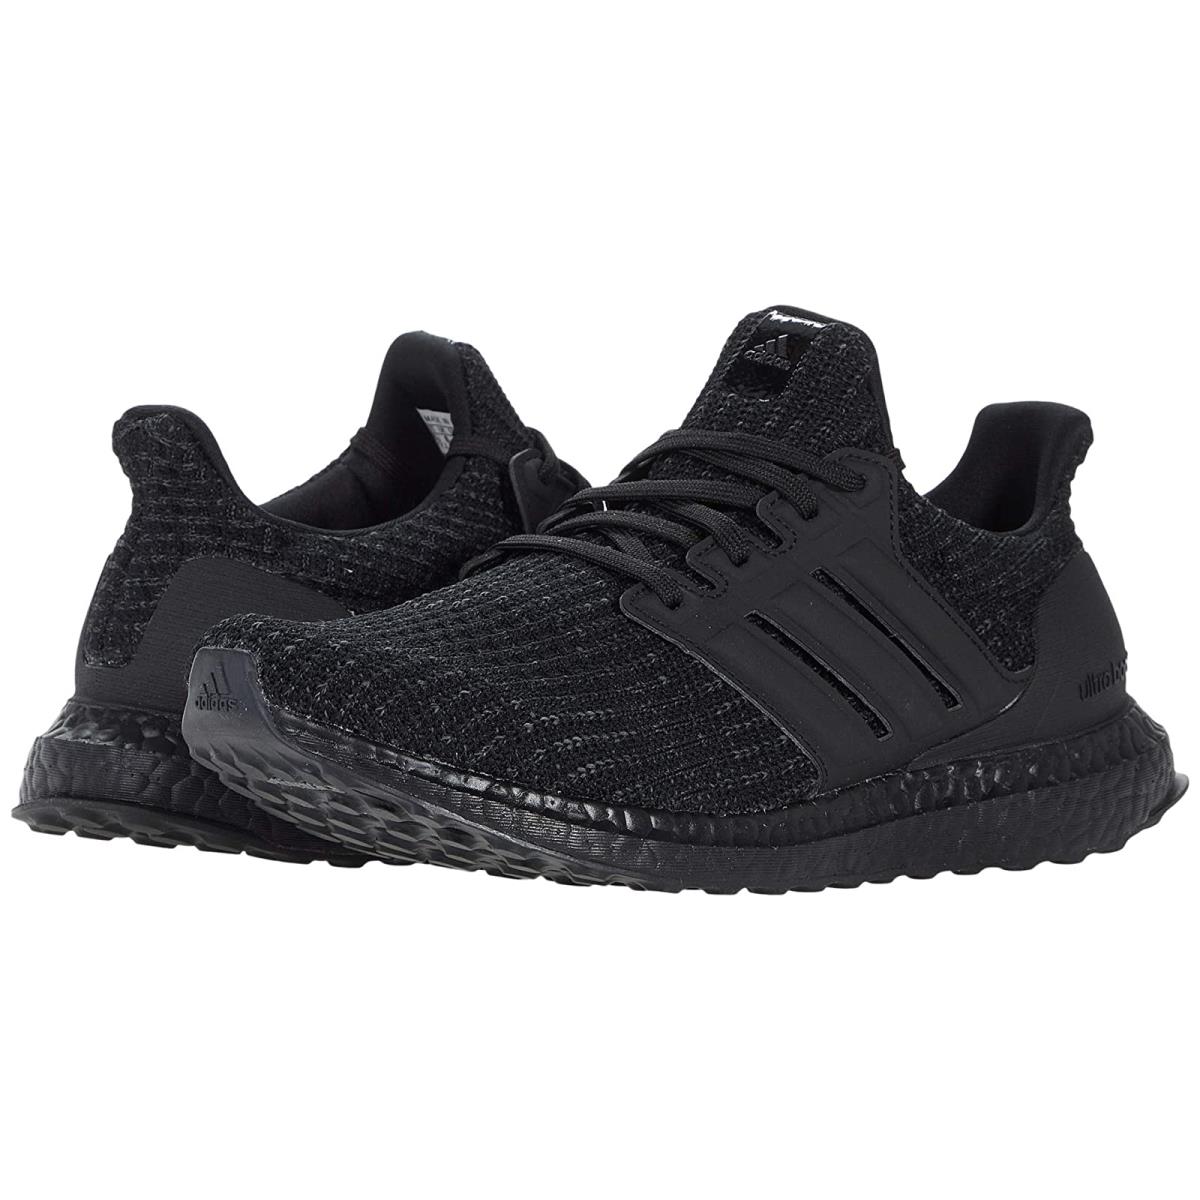 Man`s Sneakers Athletic Shoes Adidas Running Ultraboost Dna Black/Black/Grey